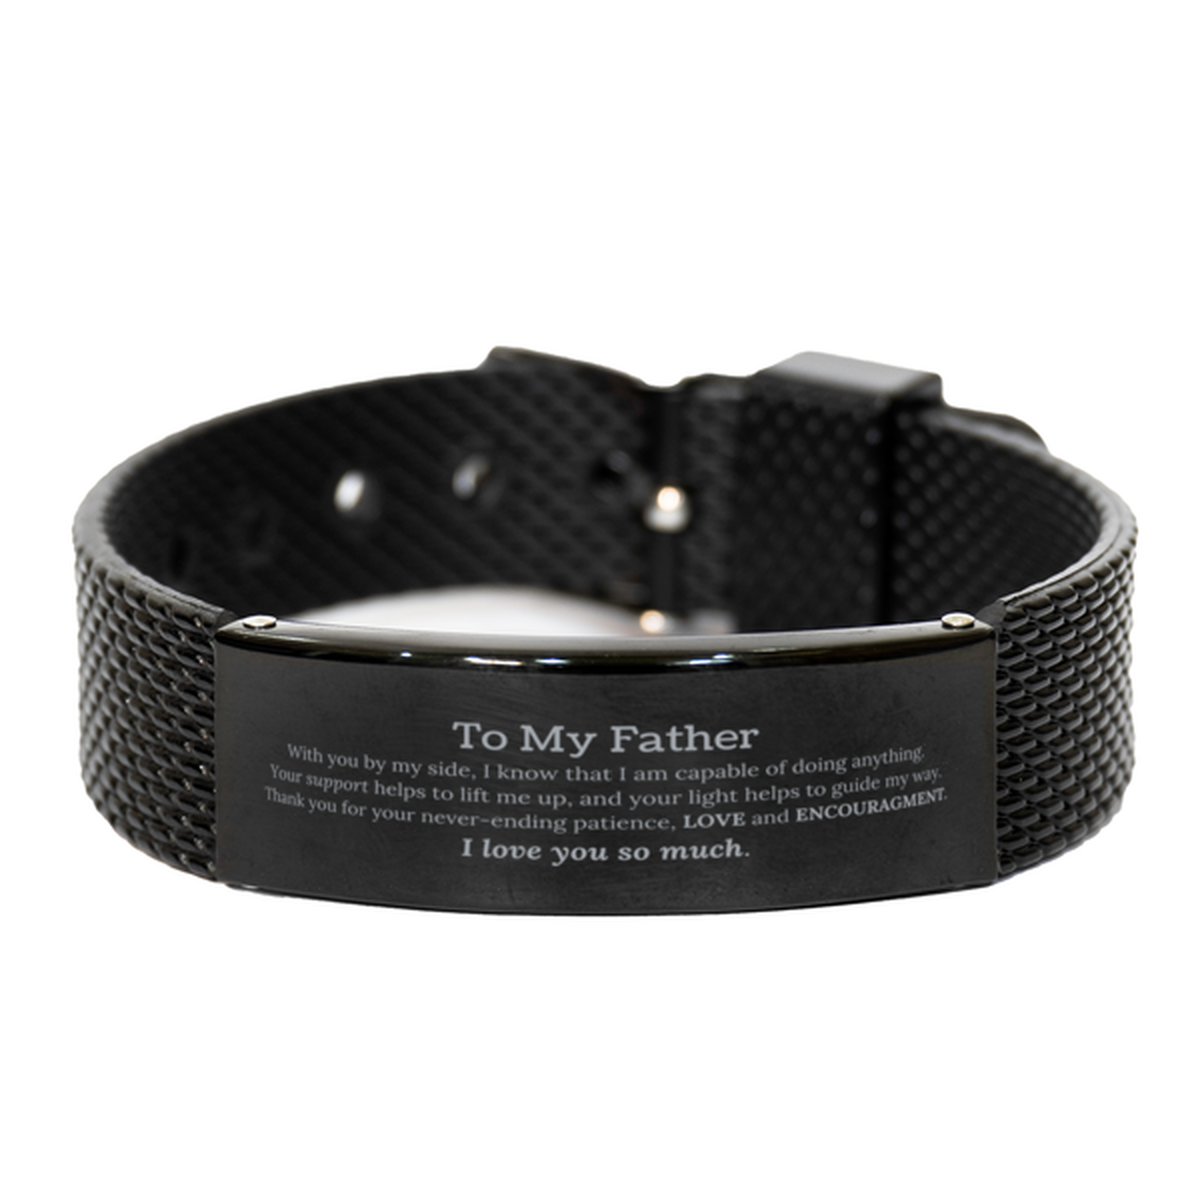 Appreciation Father Black Shark Mesh Bracelet Gifts, To My Father Birthday Christmas Wedding Keepsake Gifts for Father With you by my side, I know that I am capable of doing anything. I love you so much